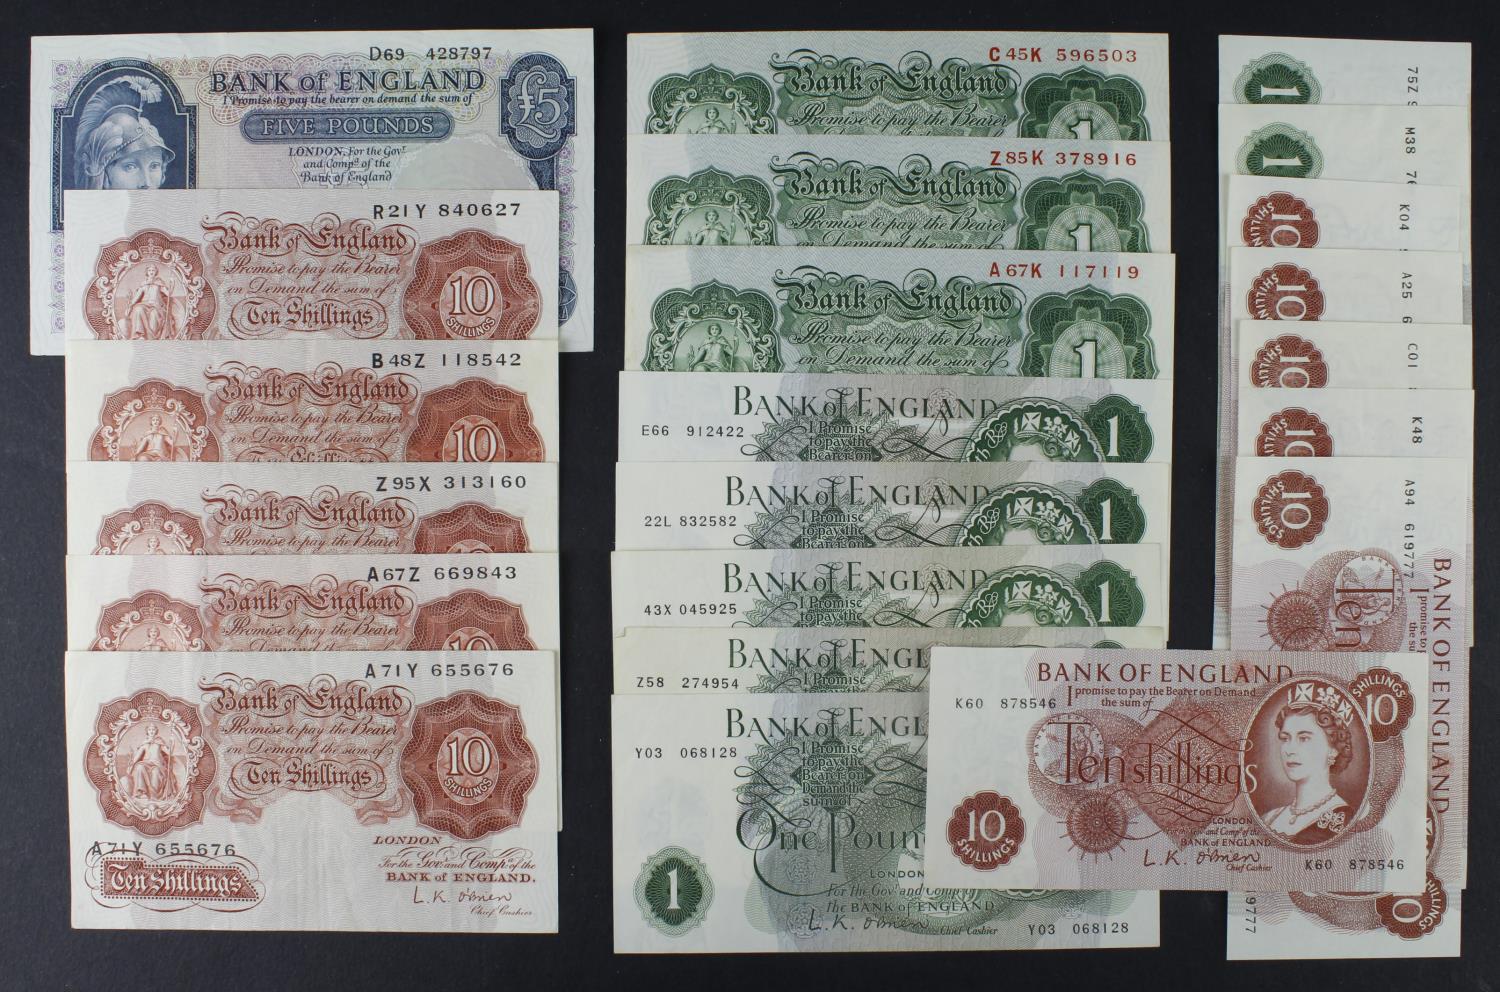 O'Brien (22), 5 Pounds issued 1957, Lion & Key note, serial D69 428797 (B277, Pick371a), 10